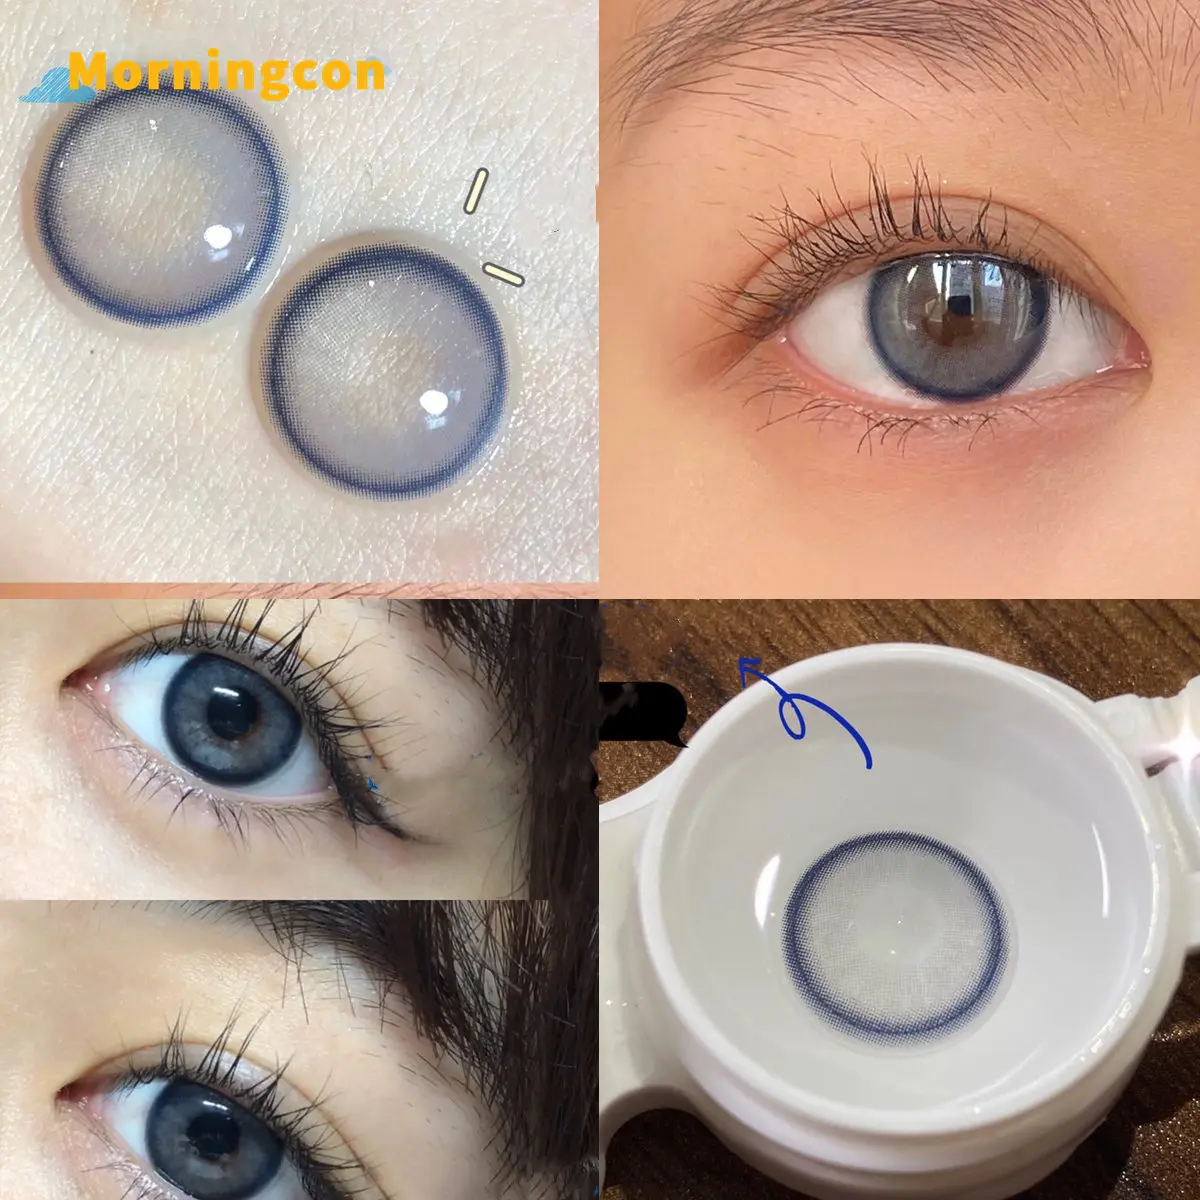 

MORNINGCON Pear Gray Myopia Prescription Soft Colored Contacts Lenses For Eyes Small Beauty Pupil Make Up Natural Yearly